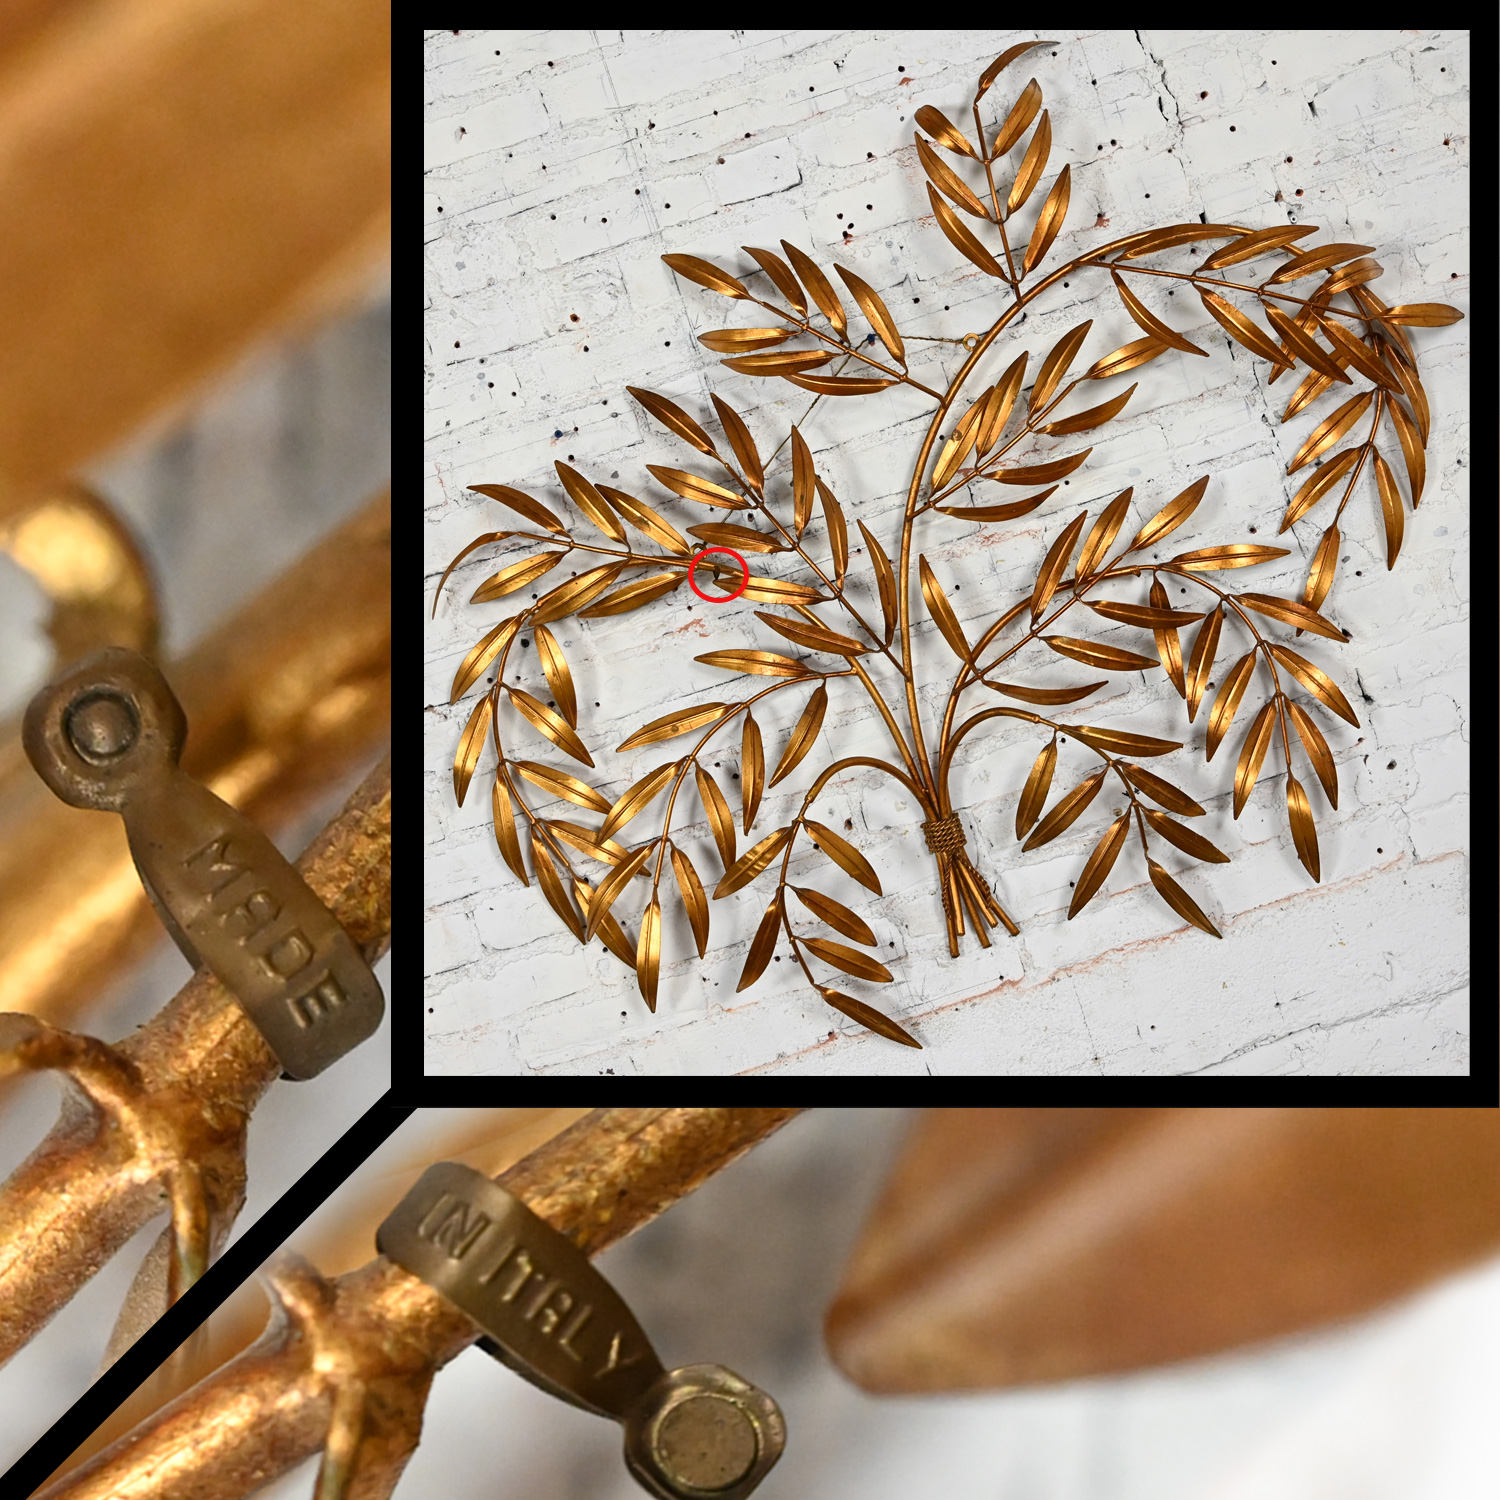 1960’s Italian Mid Century Hollywood Regency Gilt Metal Wall Sculpture of Branches with Leaves